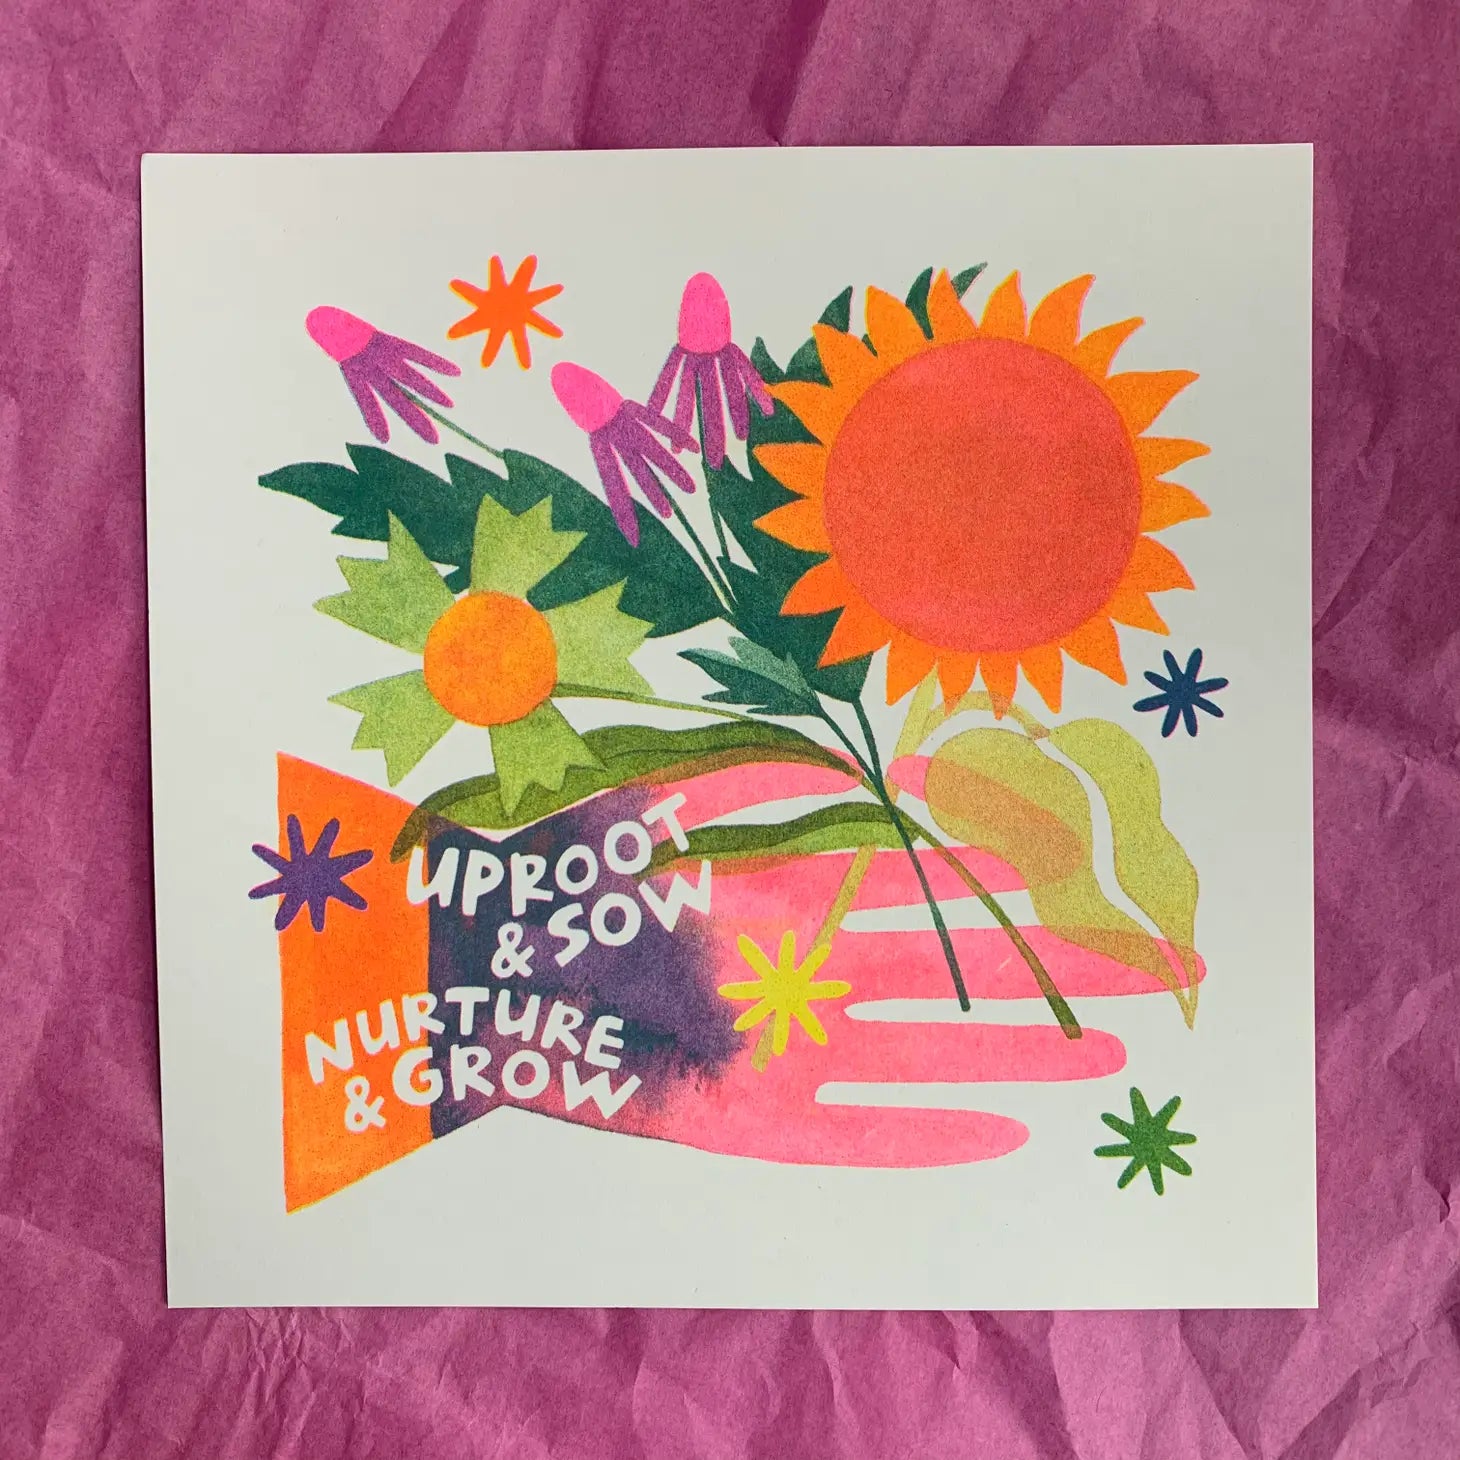 Uproot & Sow, Nurture & Grow -  Risograph Print